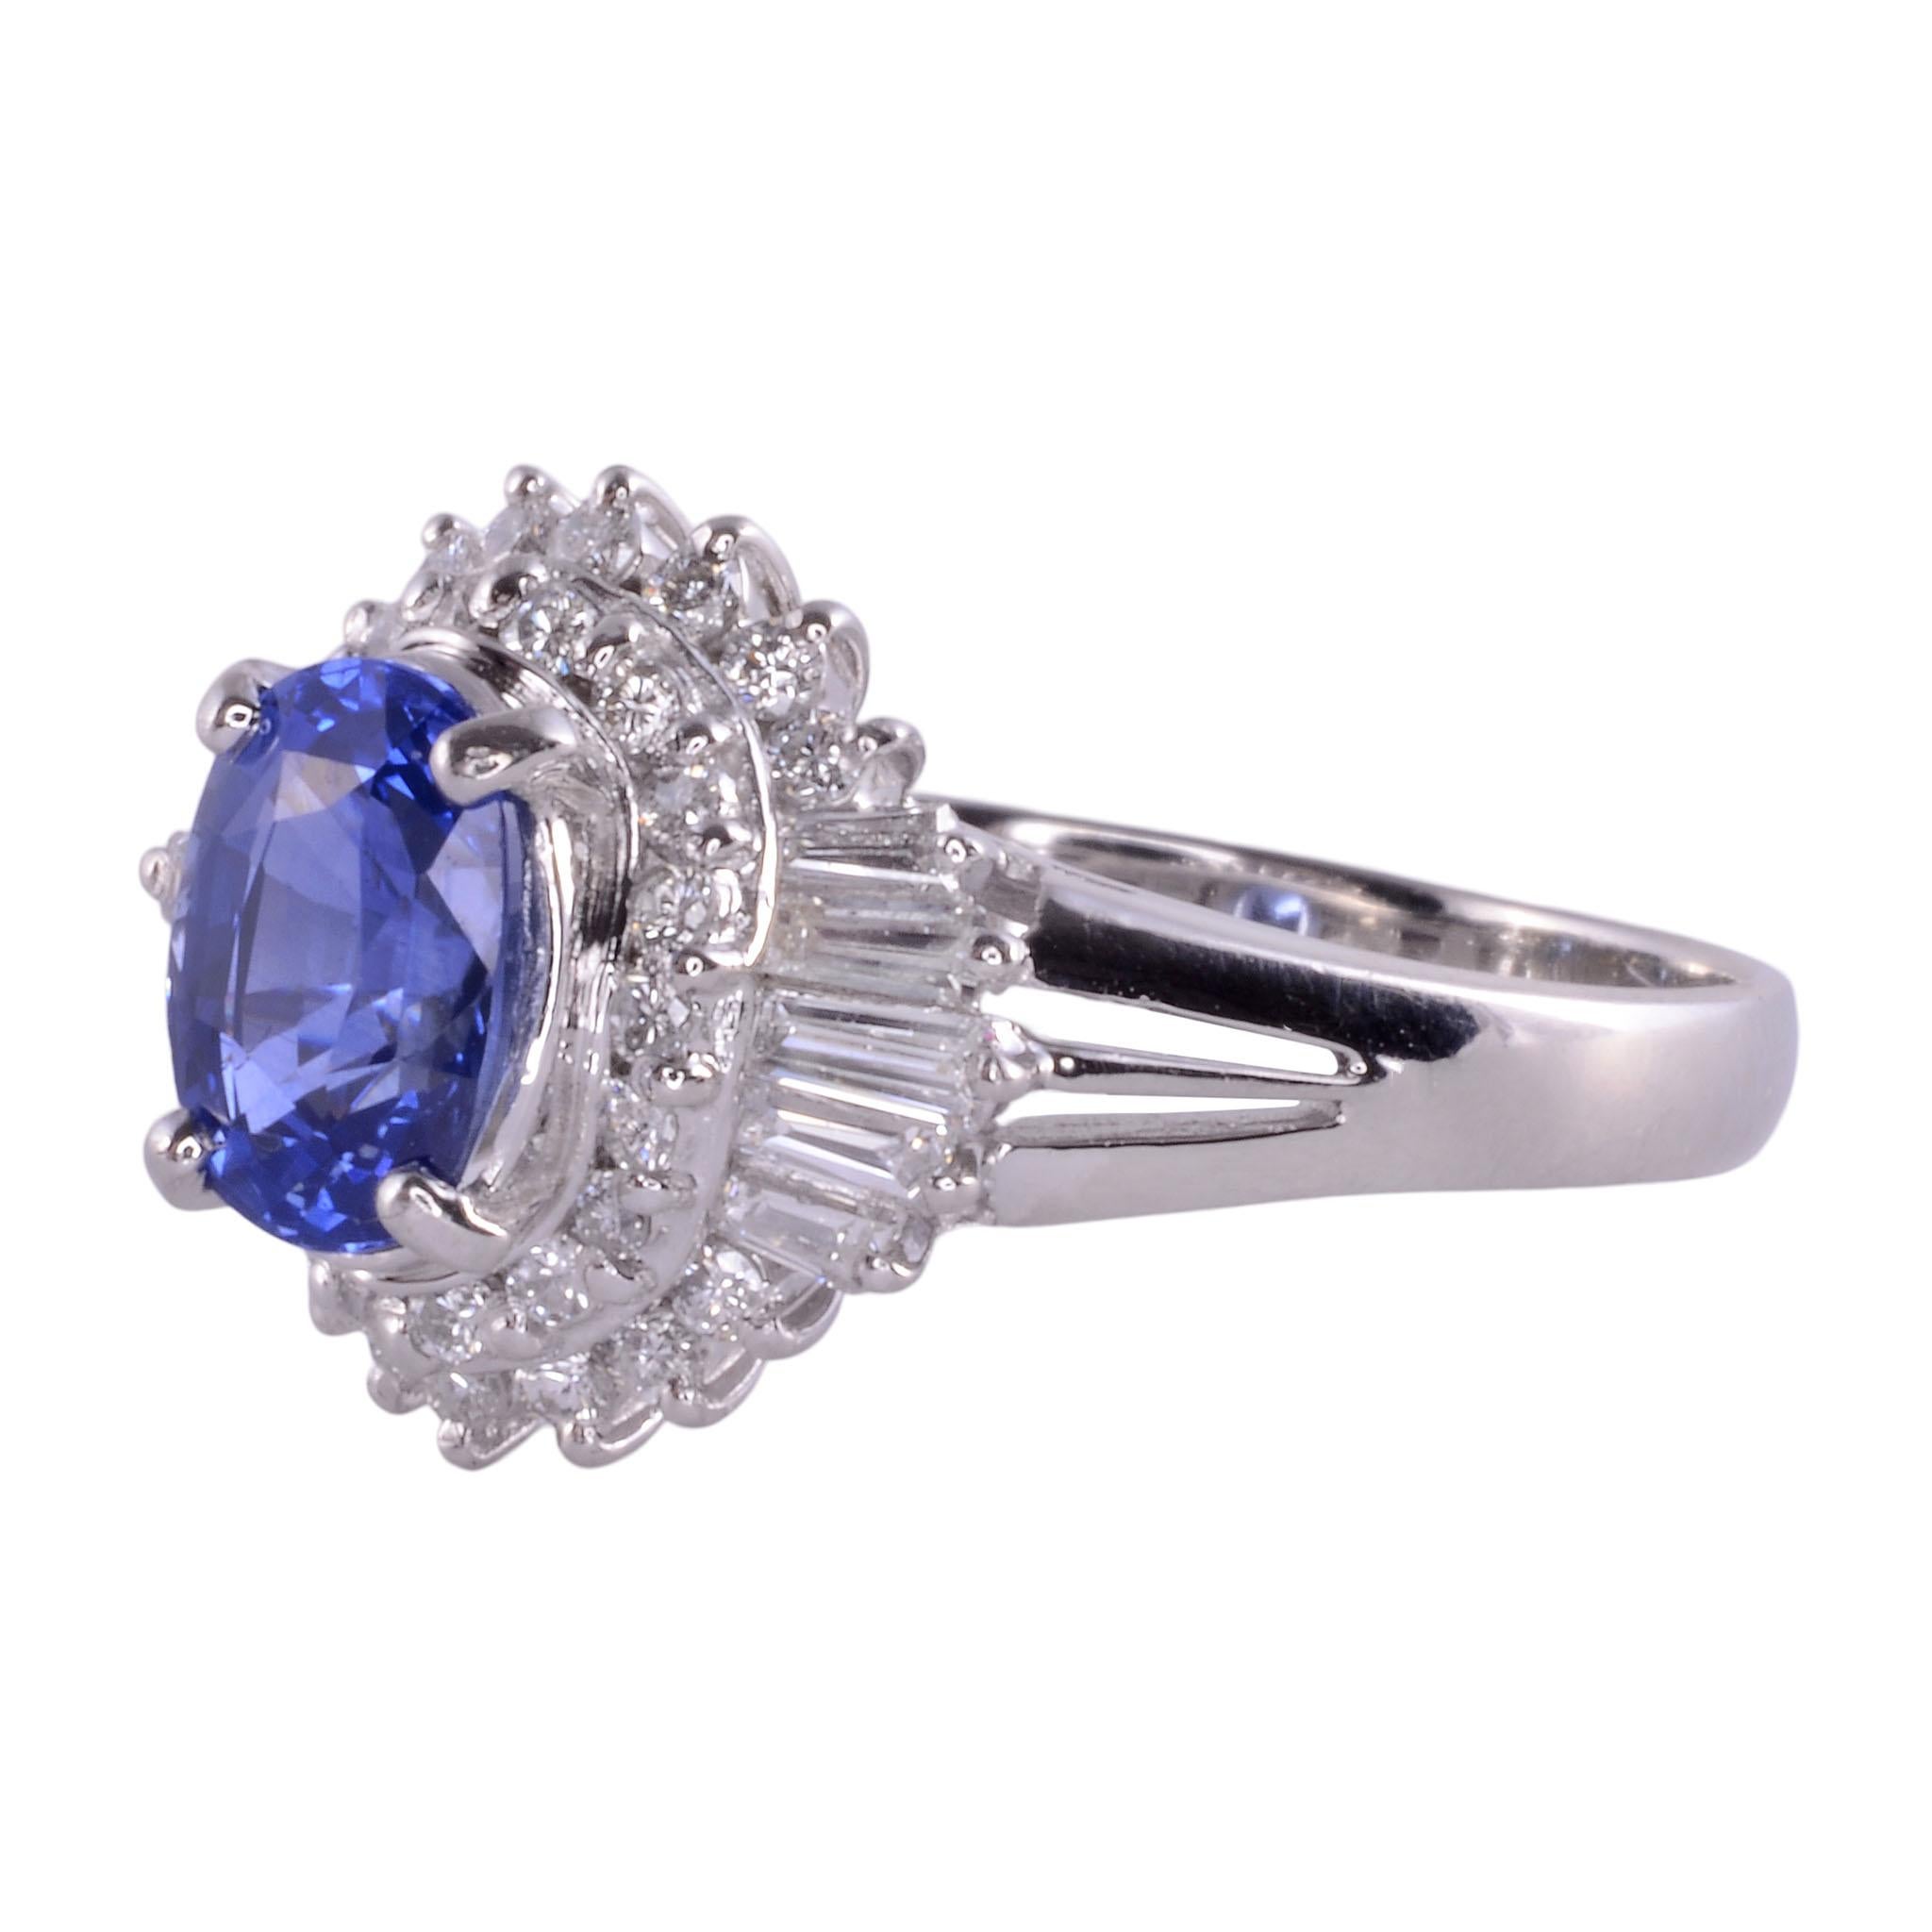 Estate Ceylon color sapphire & diamond platinum ring. This platinum ring features an oval sapphire at 1.58 carats with fine bright medium blue Ceylon color. The sapphire is accented with .06 carat total weight of baguette diamonds with SI clarity